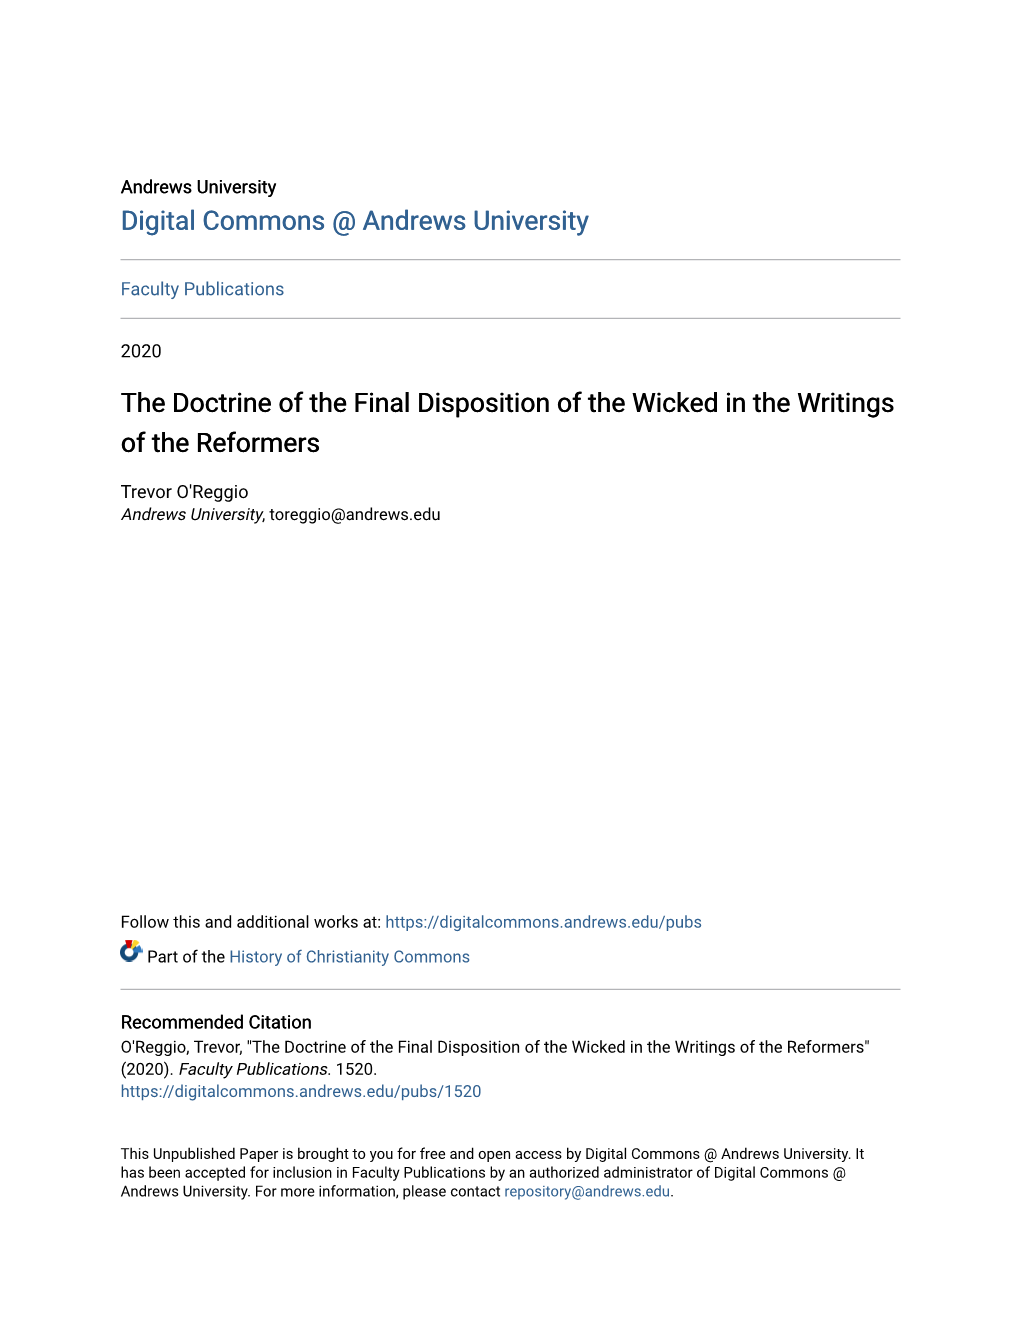 The Doctrine of the Final Disposition of the Wicked in the Writings of the Reformers